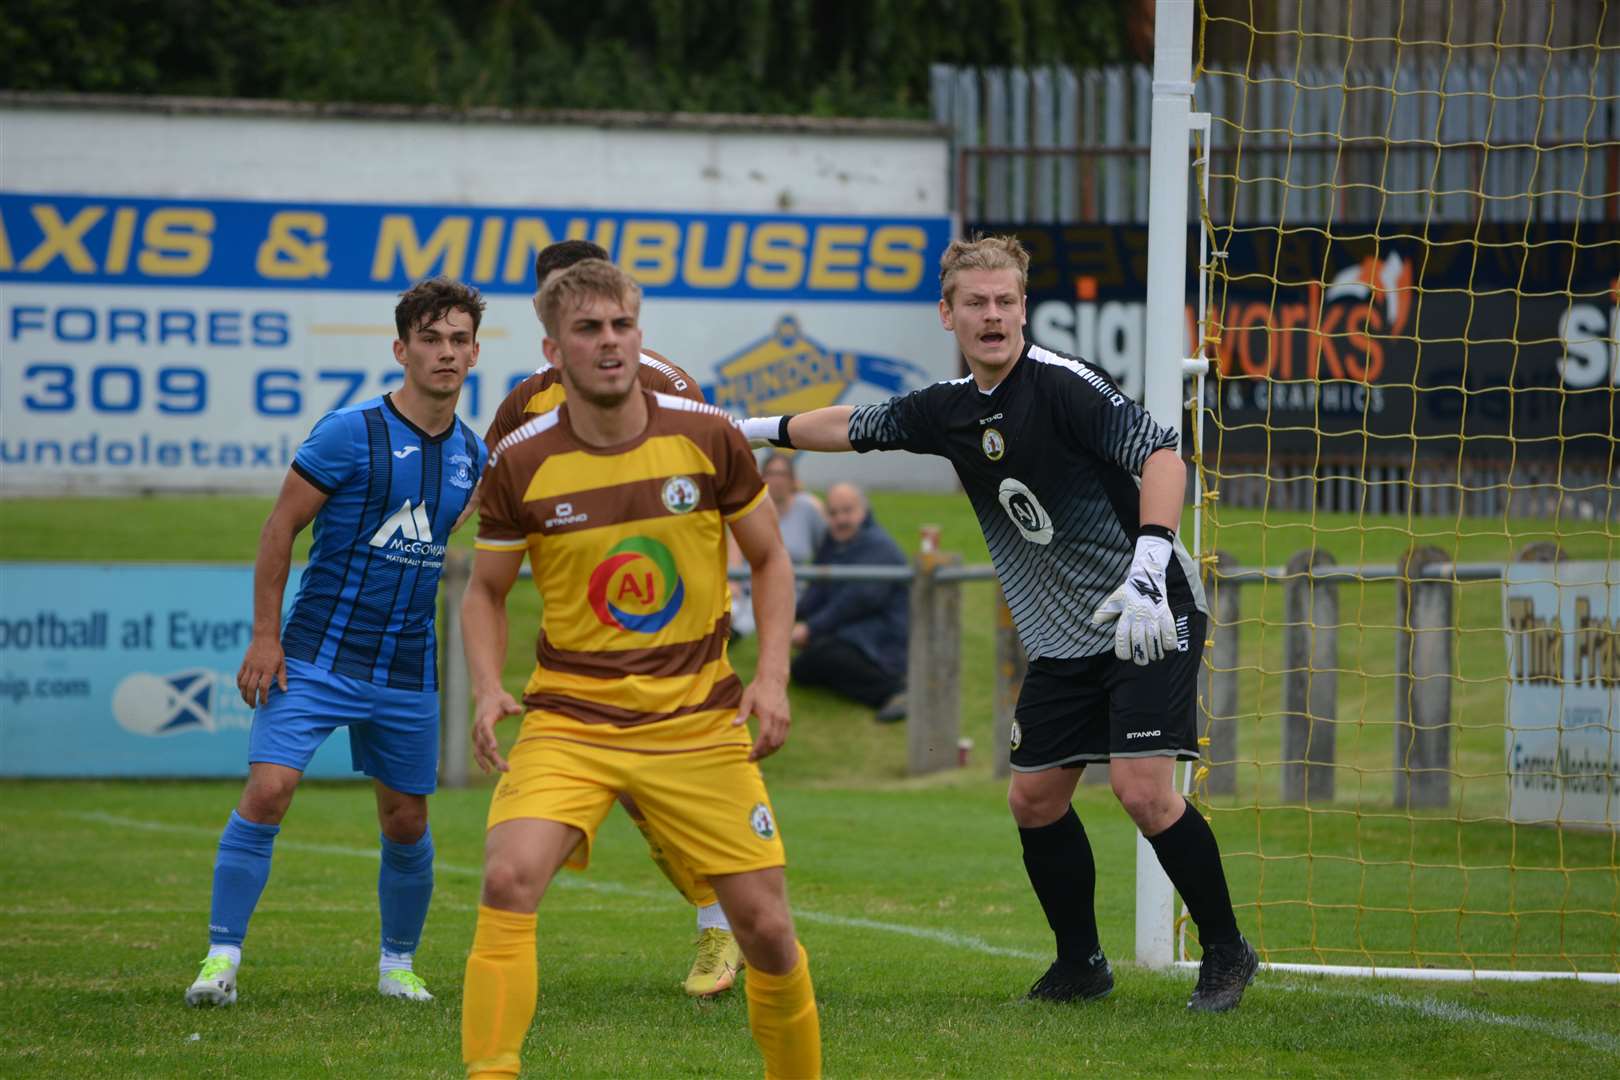 Mark McLauchlan (front) and goalkeeper Lee Herbert, who had a loan spell at Forres previously. Picture: James Souter